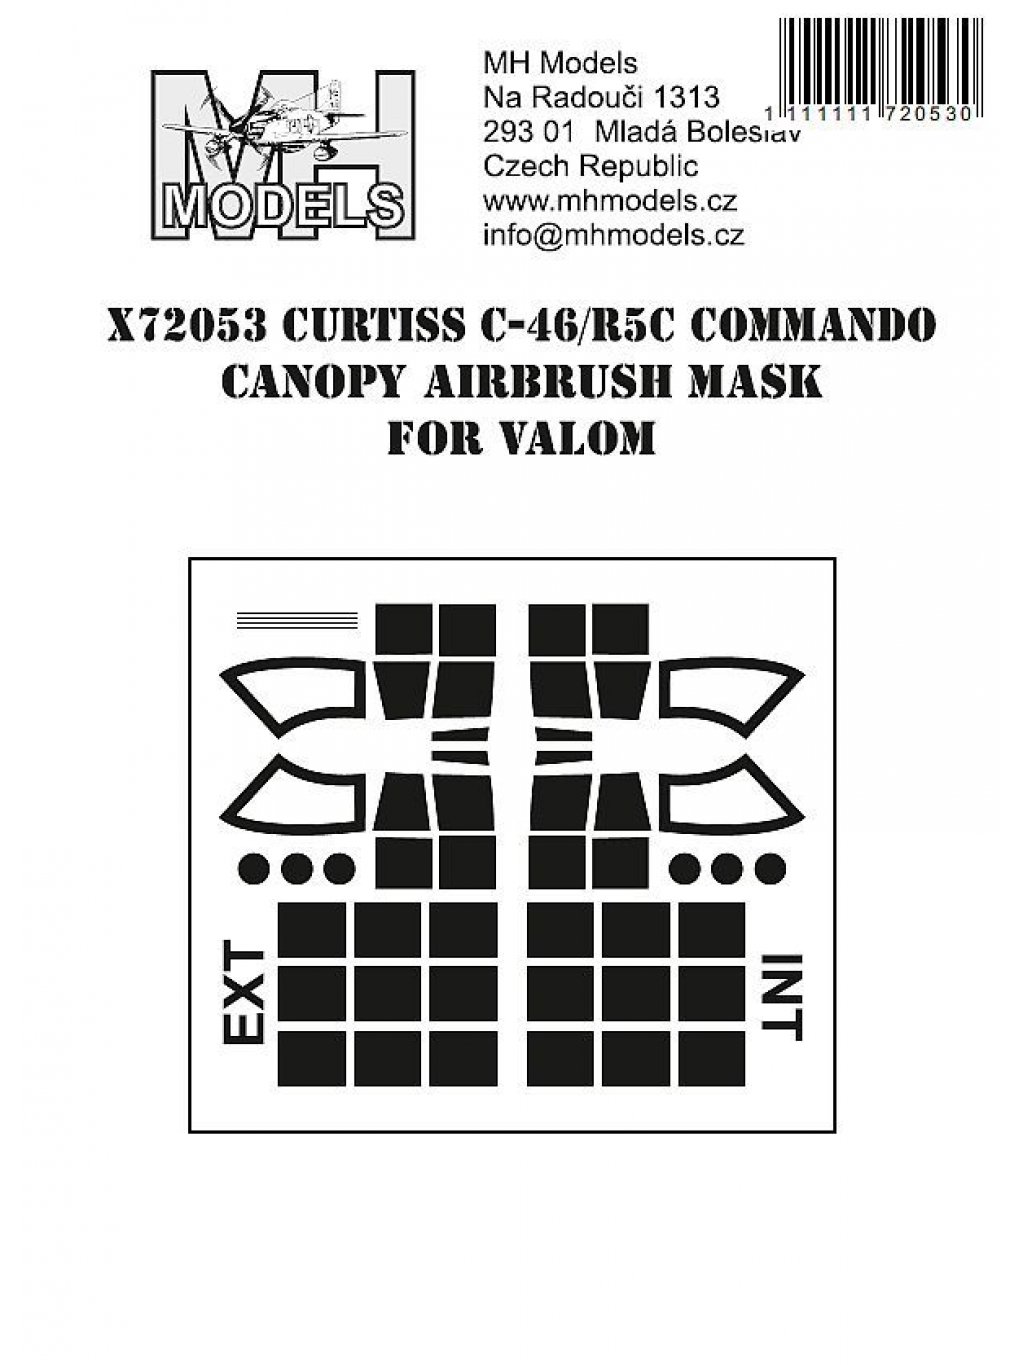 Curtiss C-46 / R5C Commando canopy airbrush mask for Valom